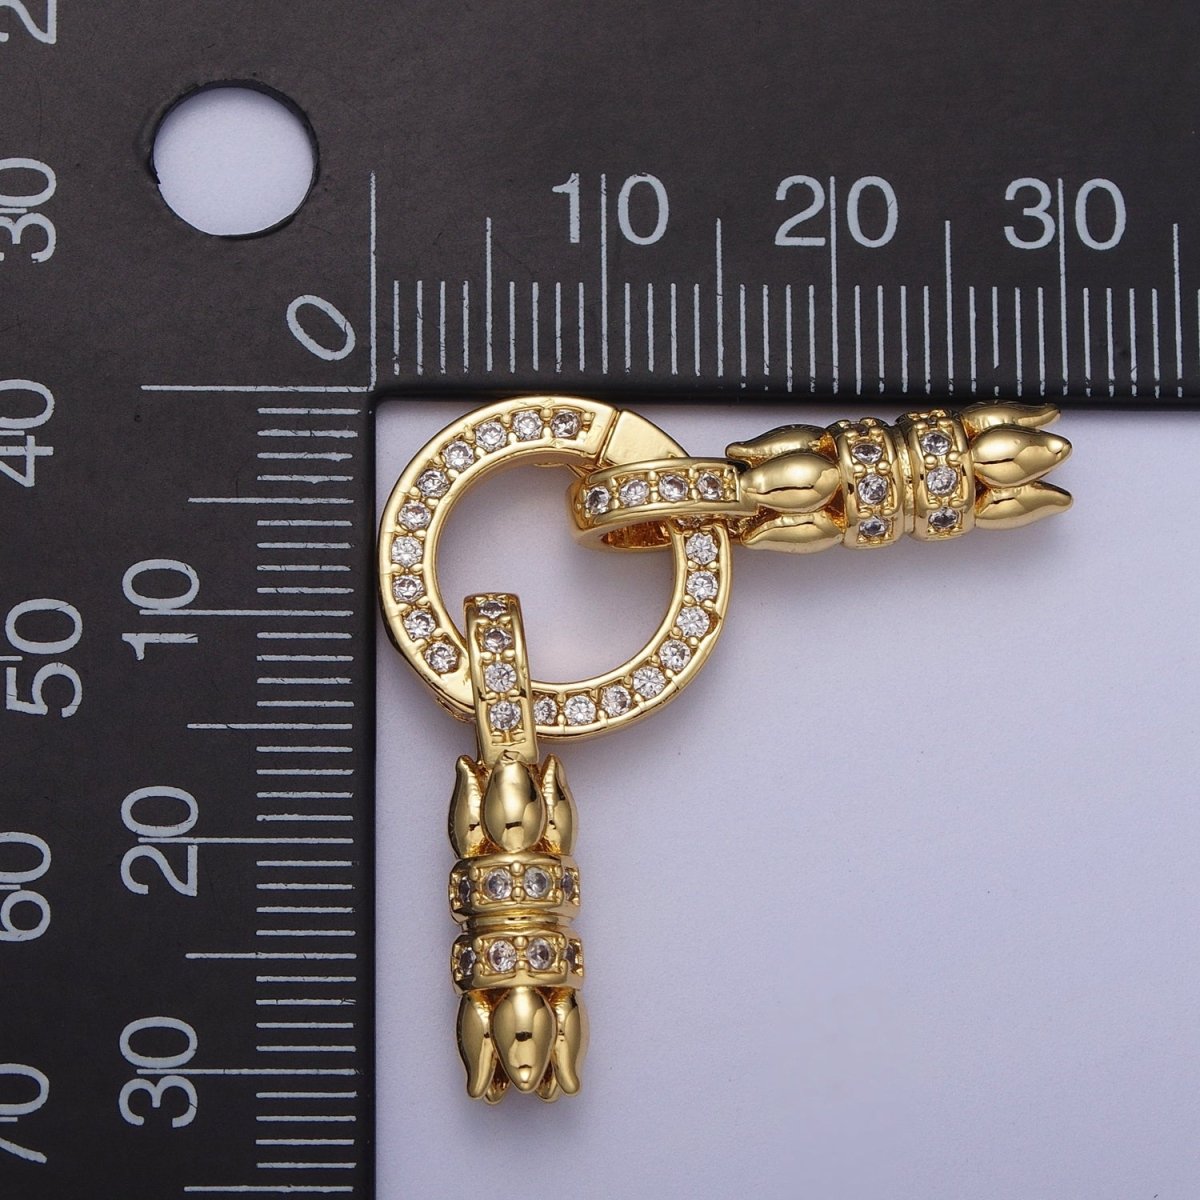 24K Gold Filled Micro Paved CZ Roses Double Loop Leather Jewelry Spring Gate Closure K-180 - DLUXCA